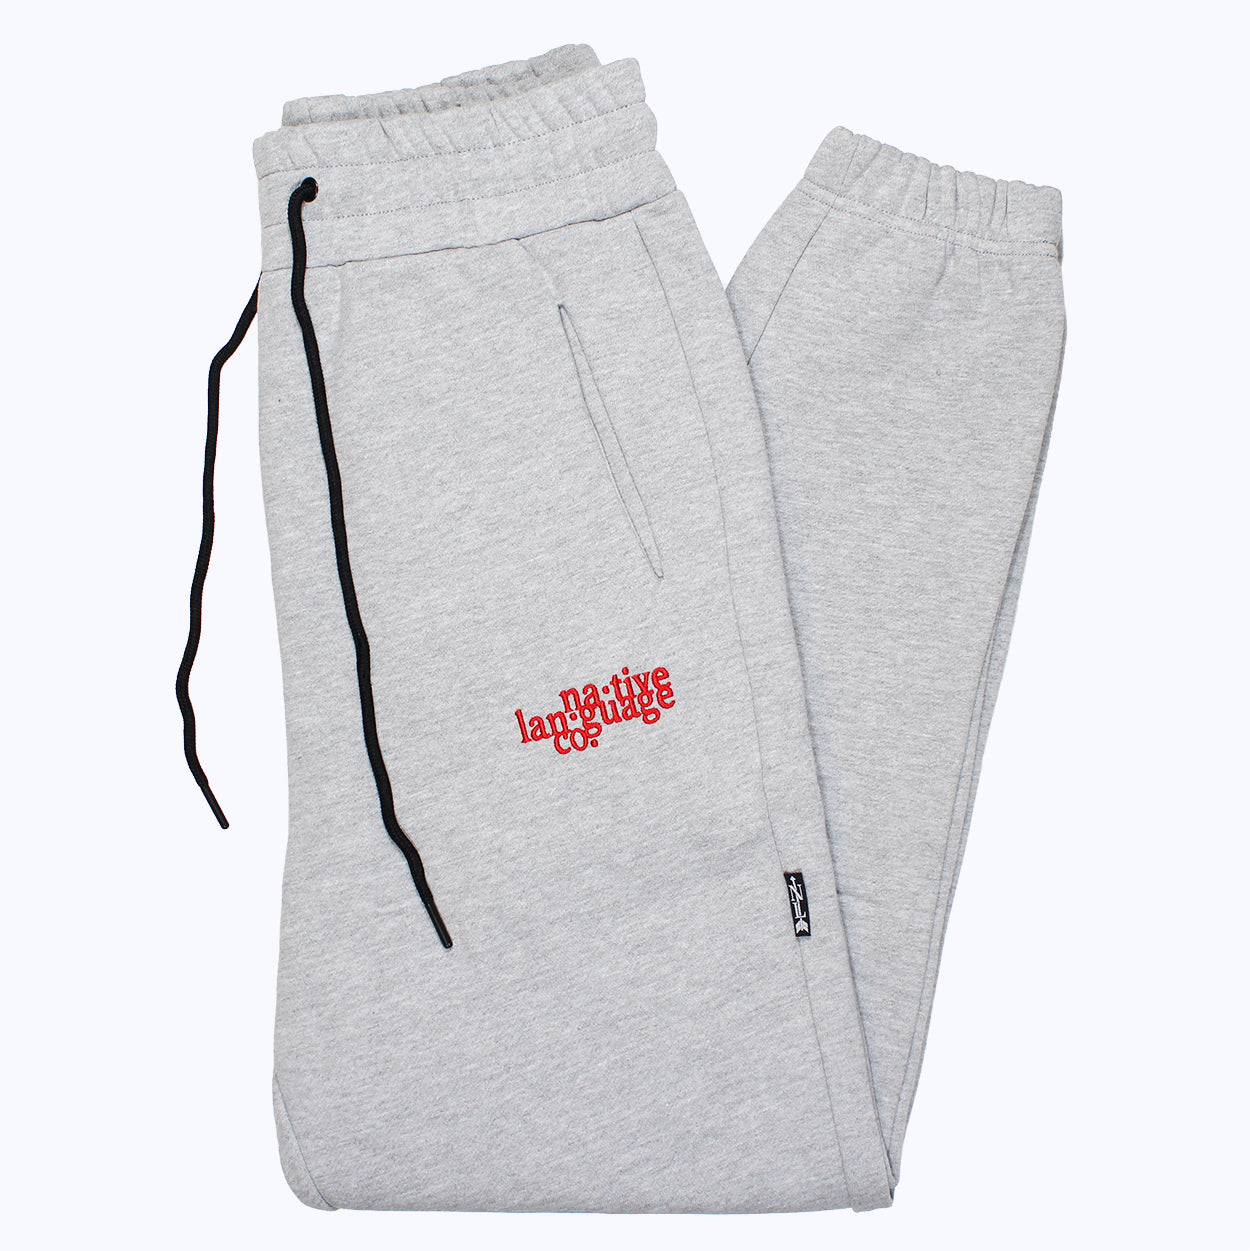 sweatpants in heather gray/red – Native Language Co.